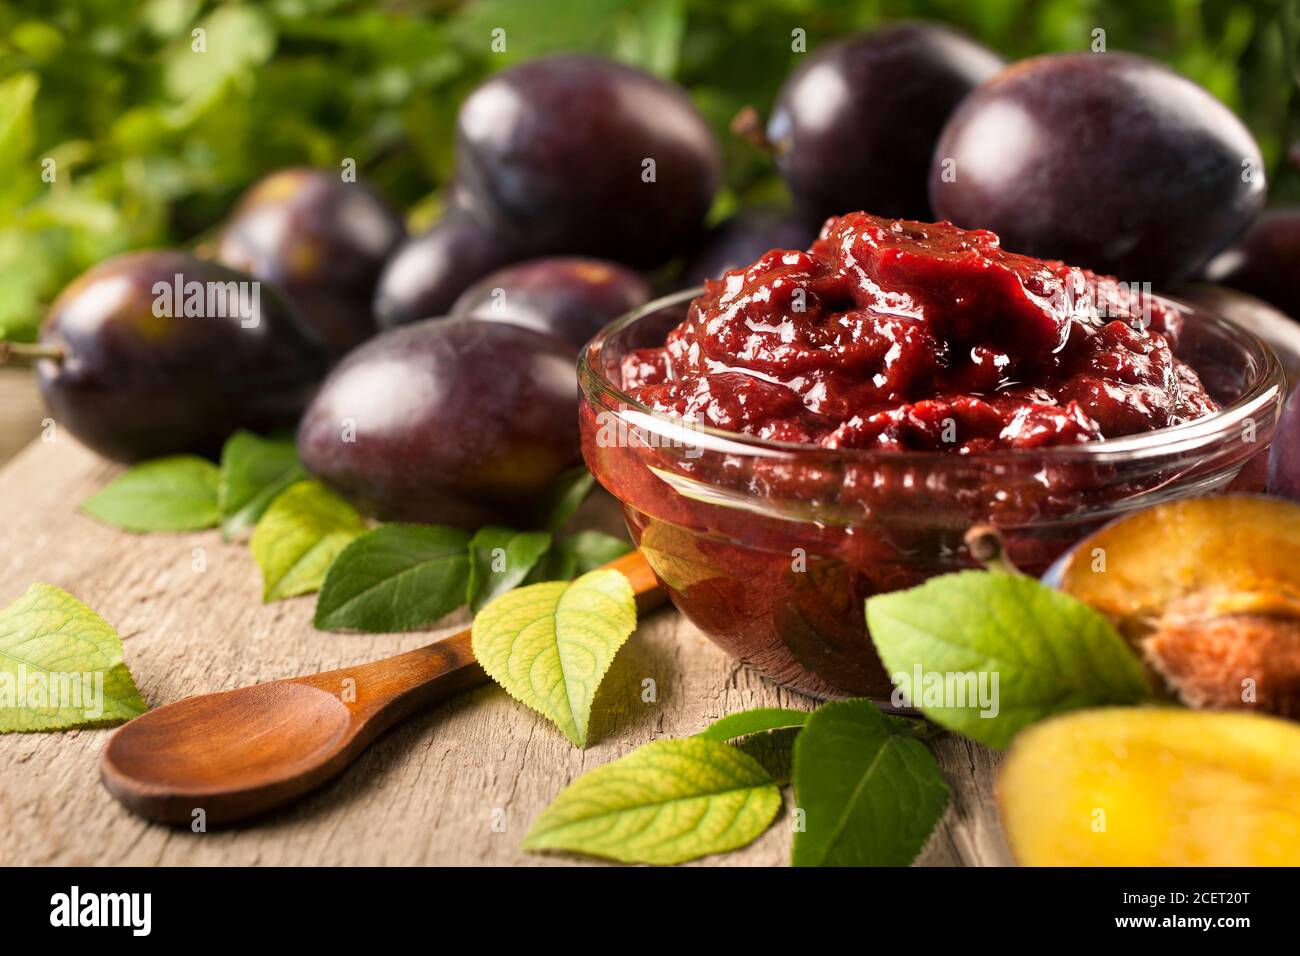 Jam of healthy organically grown plums with plum fruits on a wooden table background Stock Photo